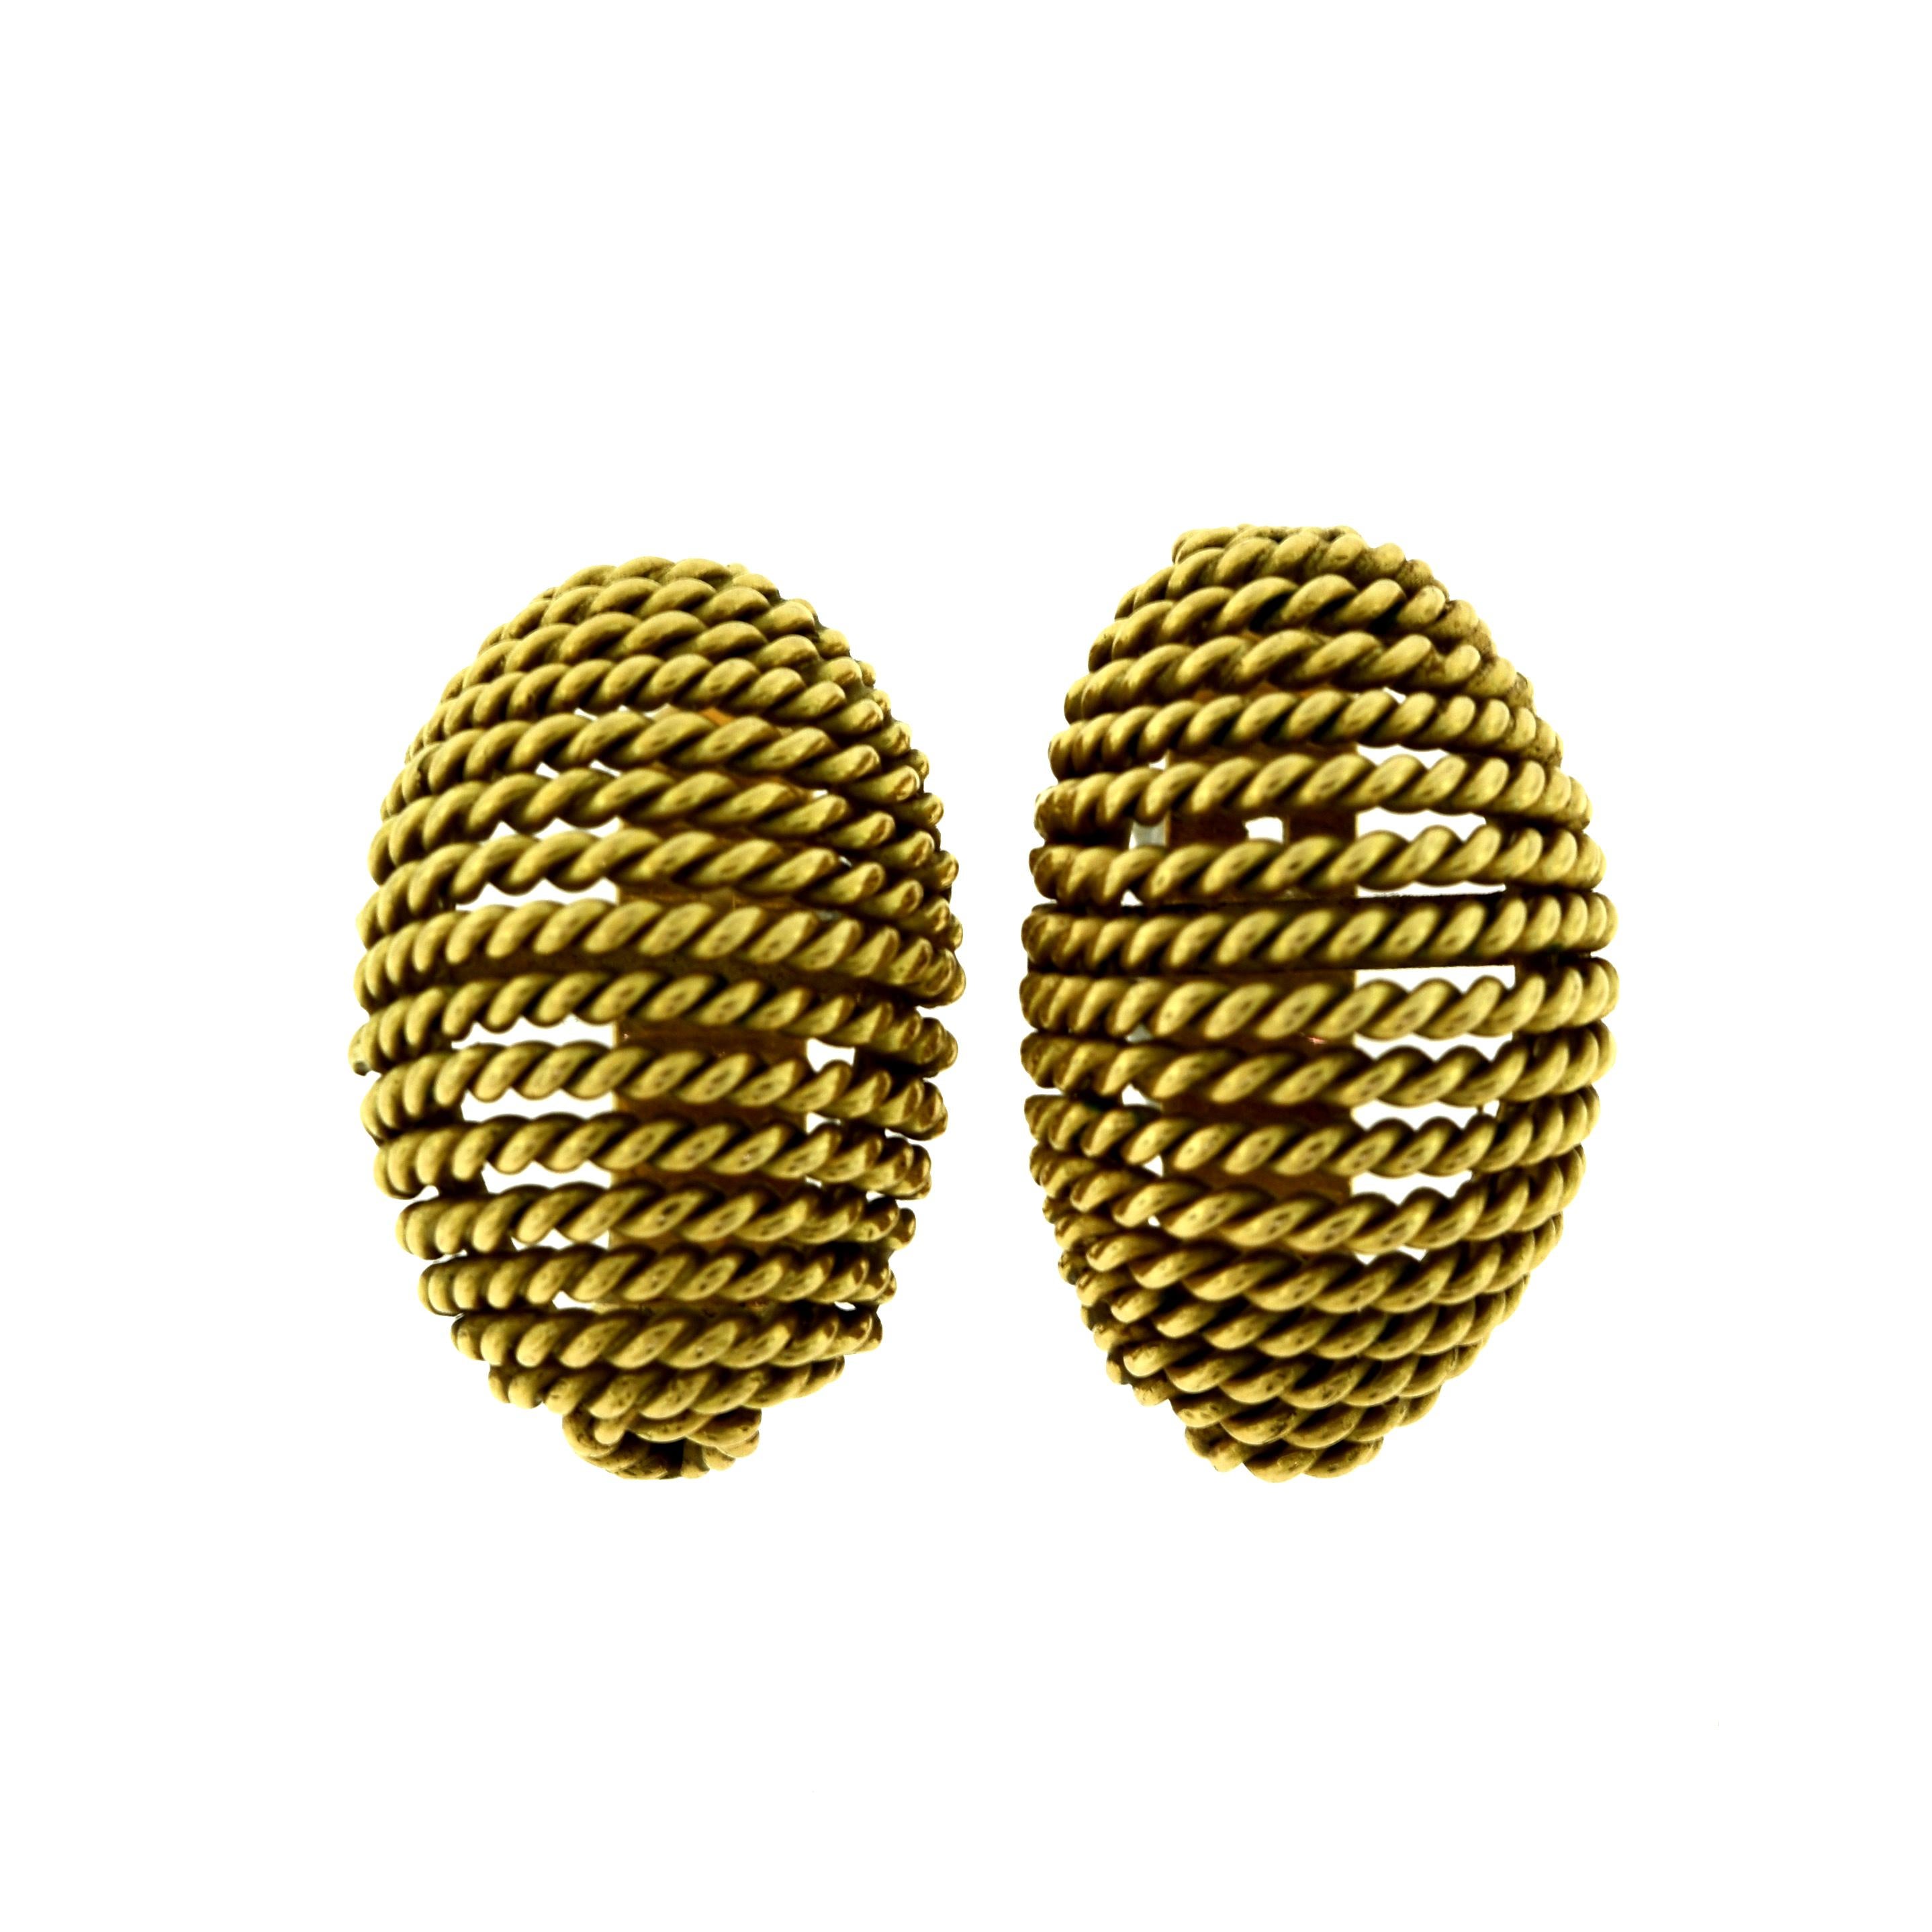 Brilliance Jewels, Miami
Questions? Call Us Anytime!
786,482,8100

Style: Oval Textured Earrings

Metal: Yellow Gold

Metal Purity: 18k 

Total Item Weight (grams): 18.0

Earring Length: approx 1.0 inches

Earring Width: approx. 0.6 inches

Closure: